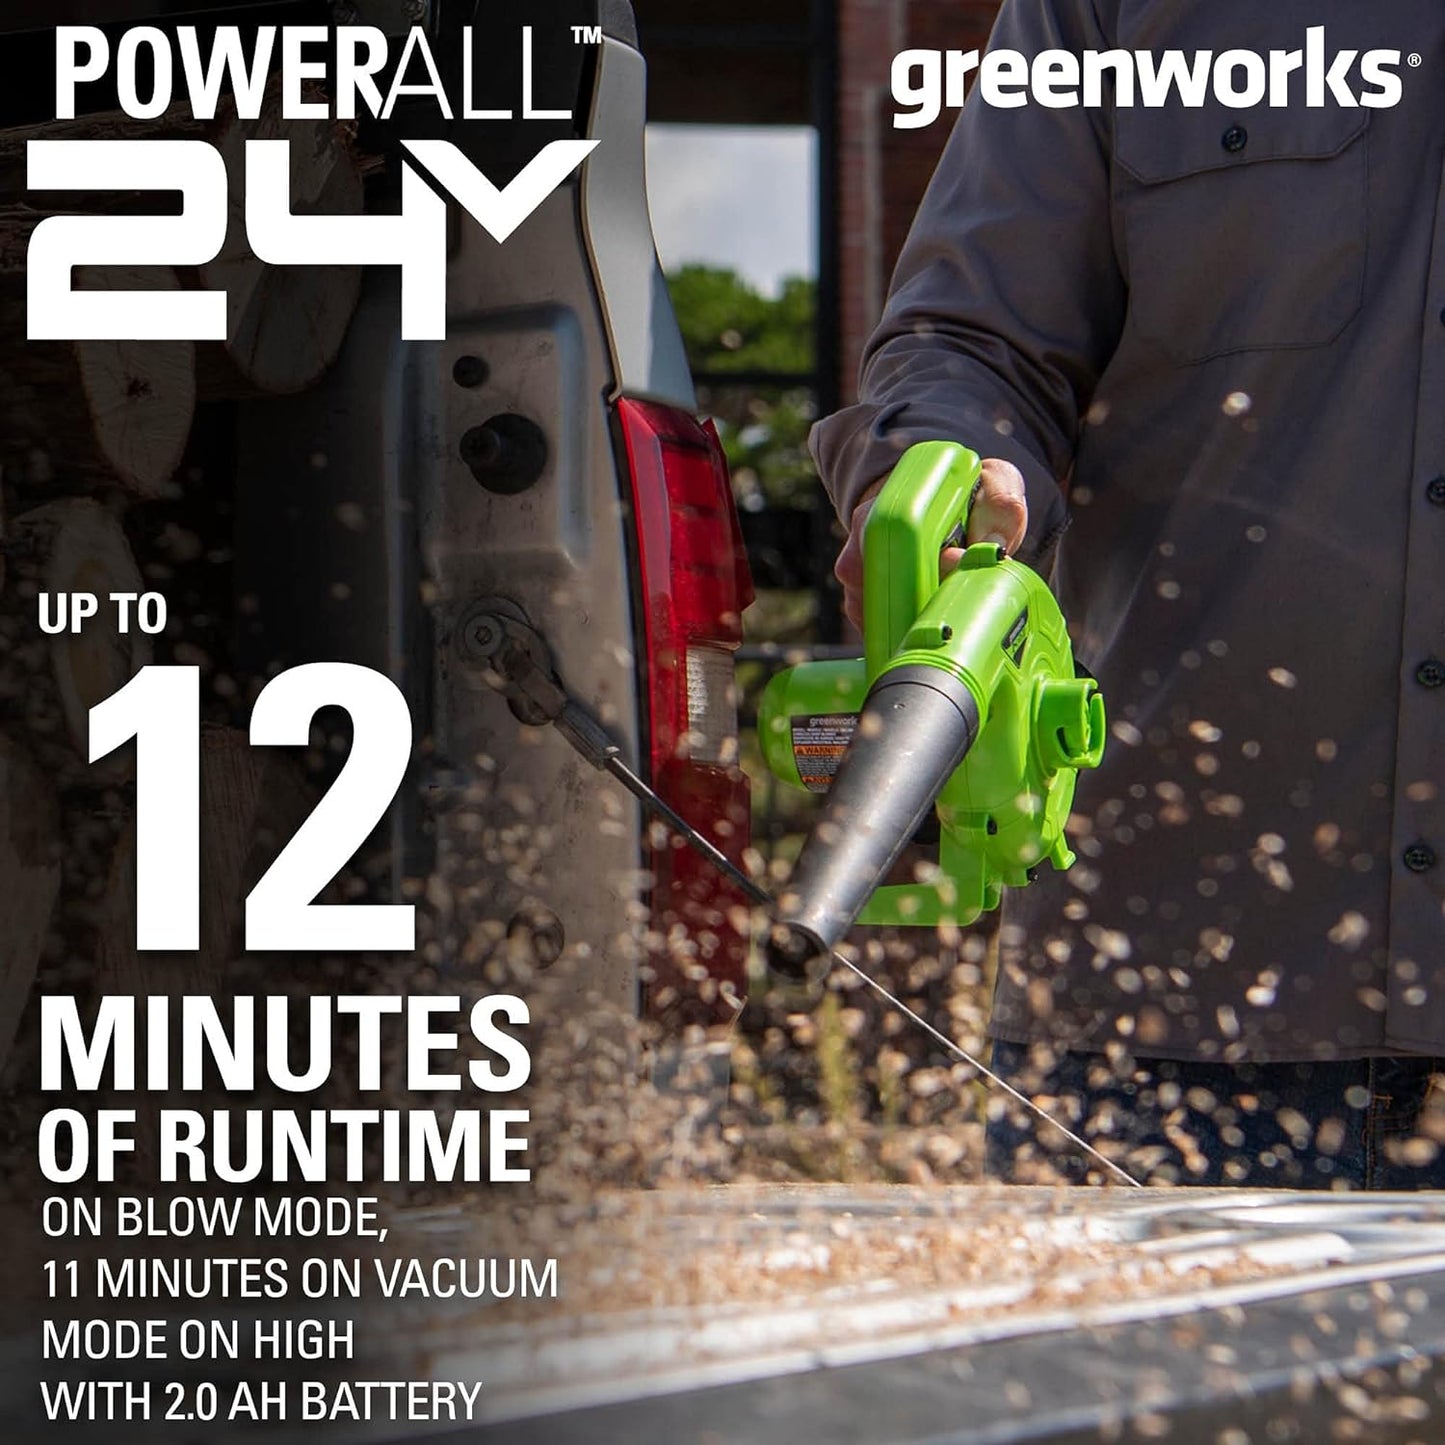 Greenworks 24V (90 MPH \/ 180 CFM \/ 125+ Compatible Tools) Cordless Shop Blower, 2.0Ah Battery and Charger Included